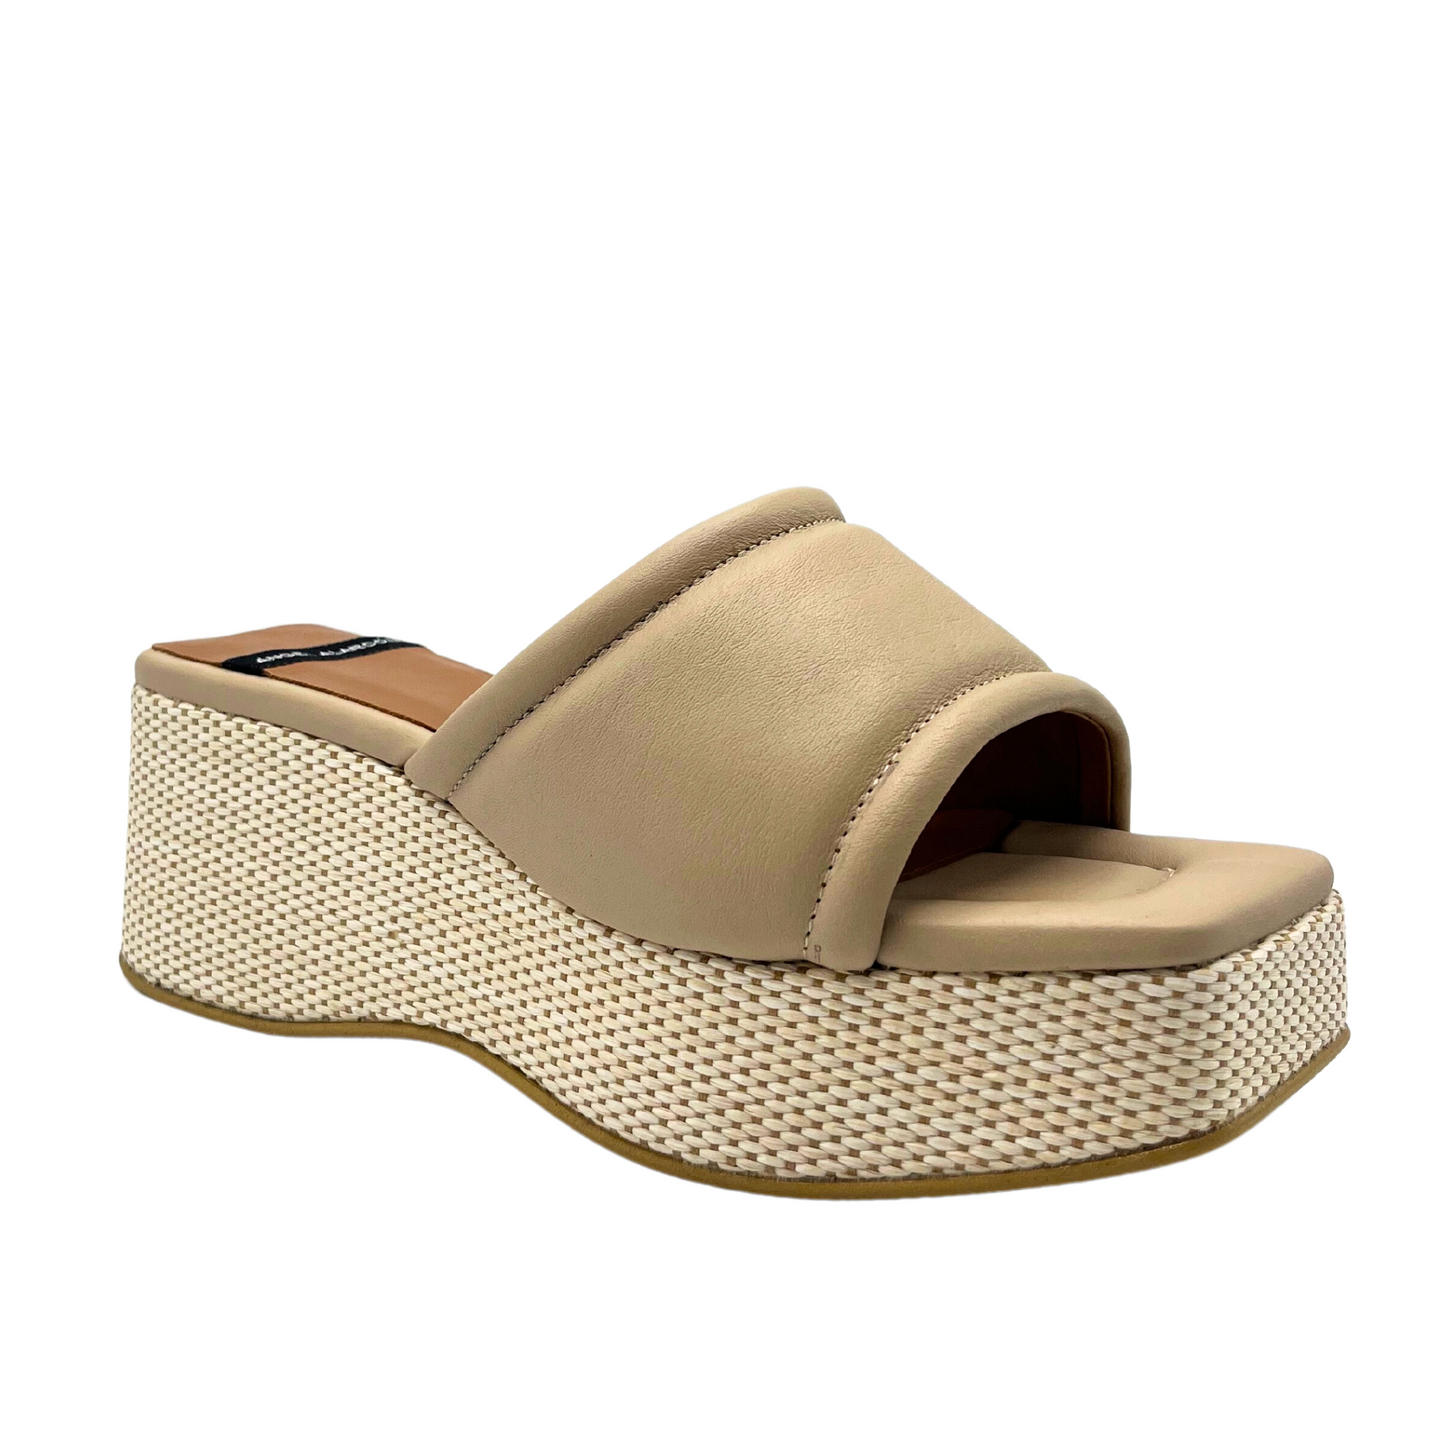 Side angle view of the Angel Alarcon Naomi in Dream Skin (ecru/tan).  Platform mule with light  weave detail on wedge which contrasts with smooth padded leather upper.